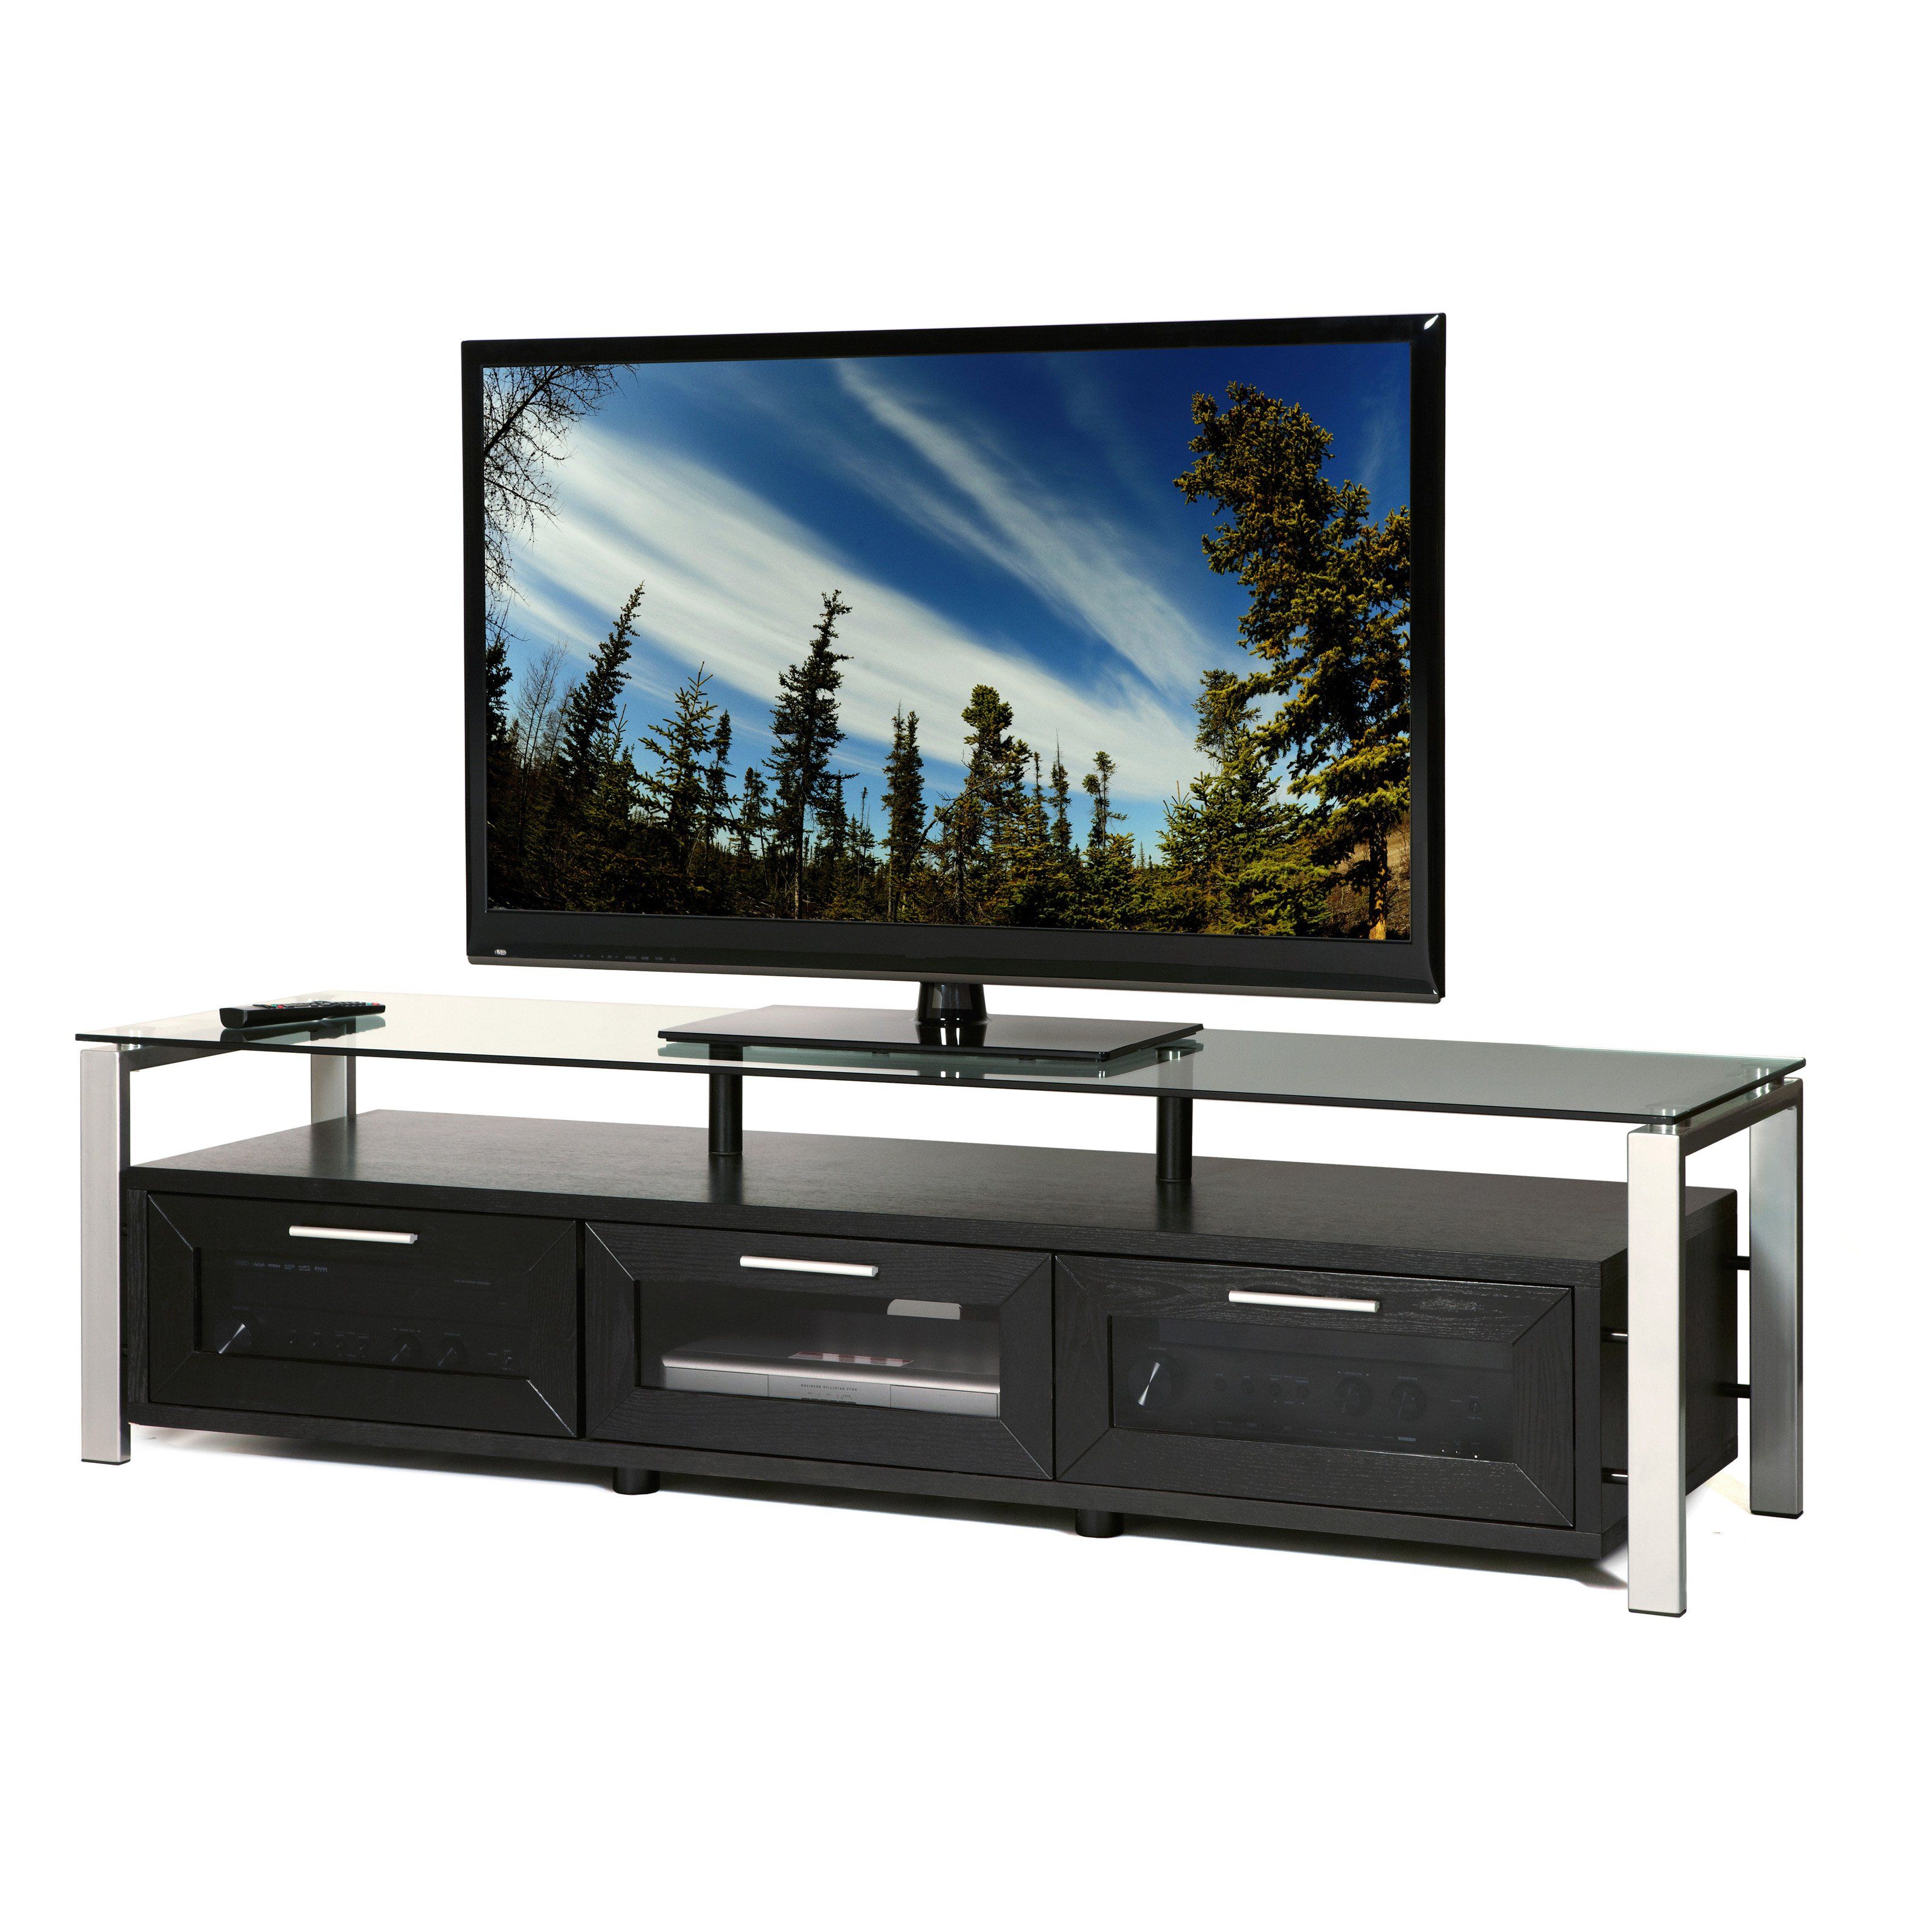 Famous 90 Inch Tv Stand 75 Best Buy Solid Wood 70 85 With Mount White With Solid Wood Black Tv Stands (View 13 of 20)